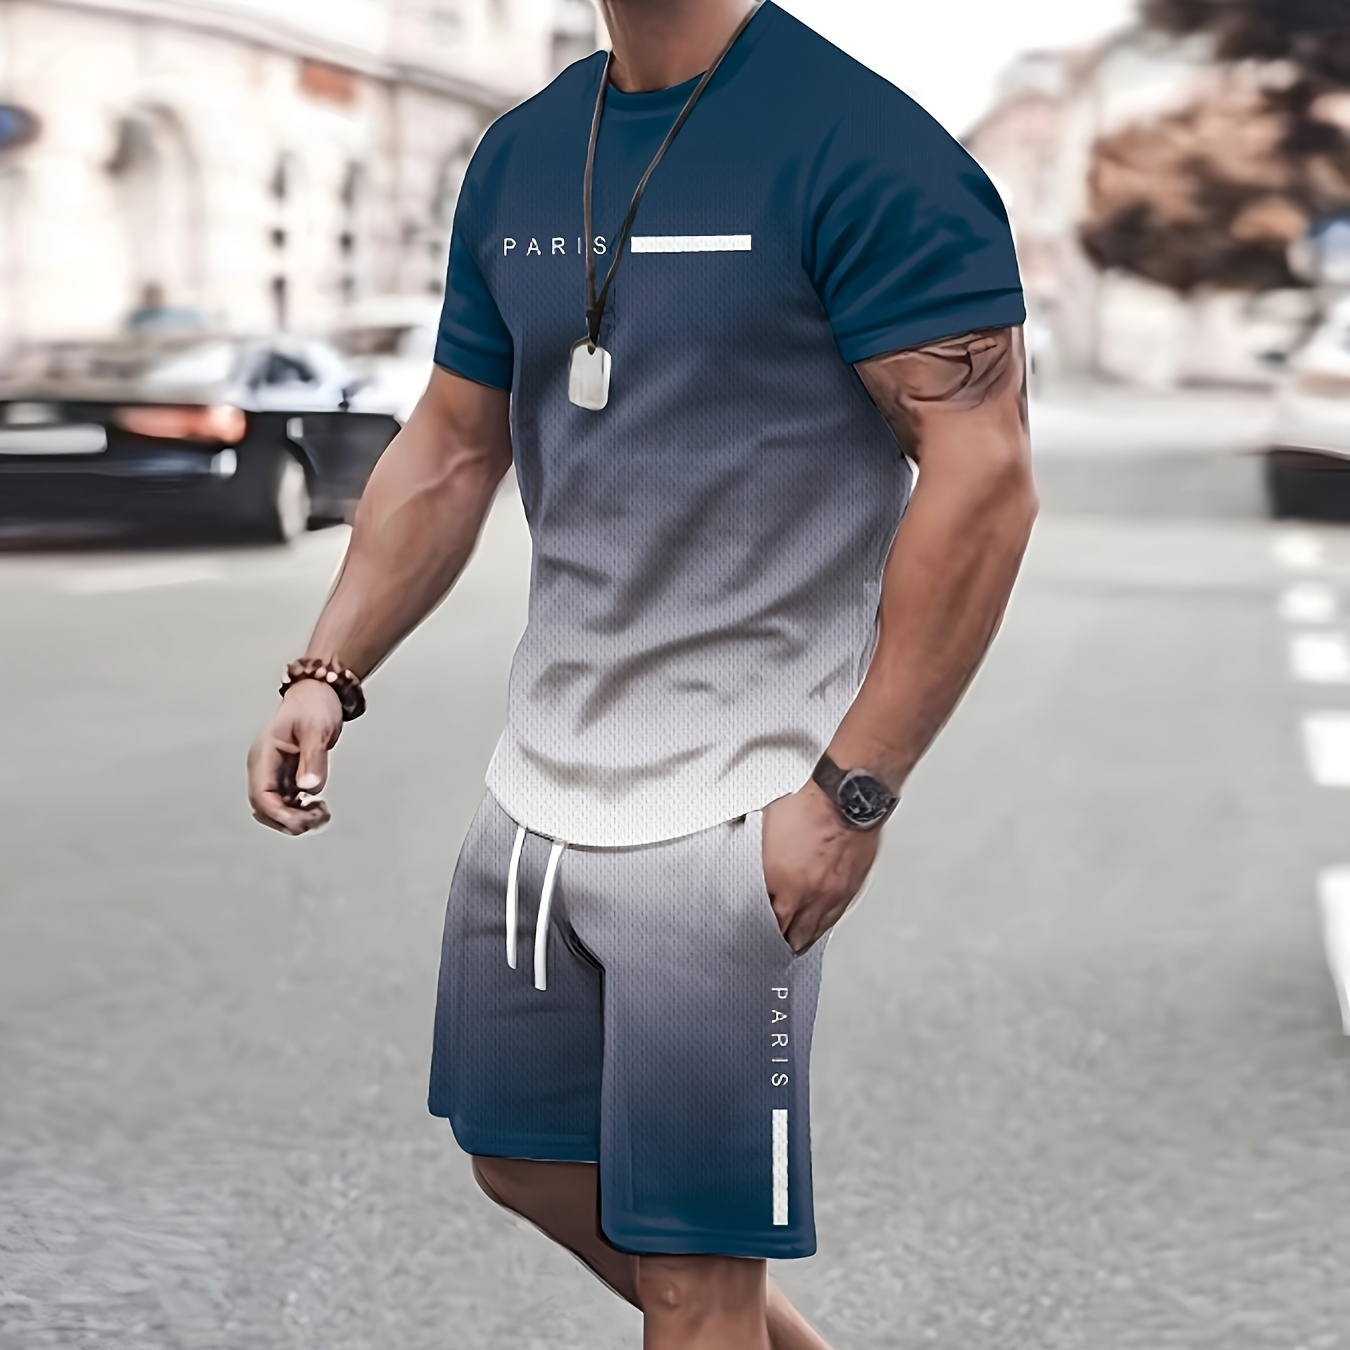 

Men's Two-piece Set Of Gradient Color Tops And Shorts, Letter Print "paris" Crew Neck And Short Sleeve T-shirt And Shorts With Drawstring And Pockets, Casual And Trendy Set For Summer Outdoors Wear